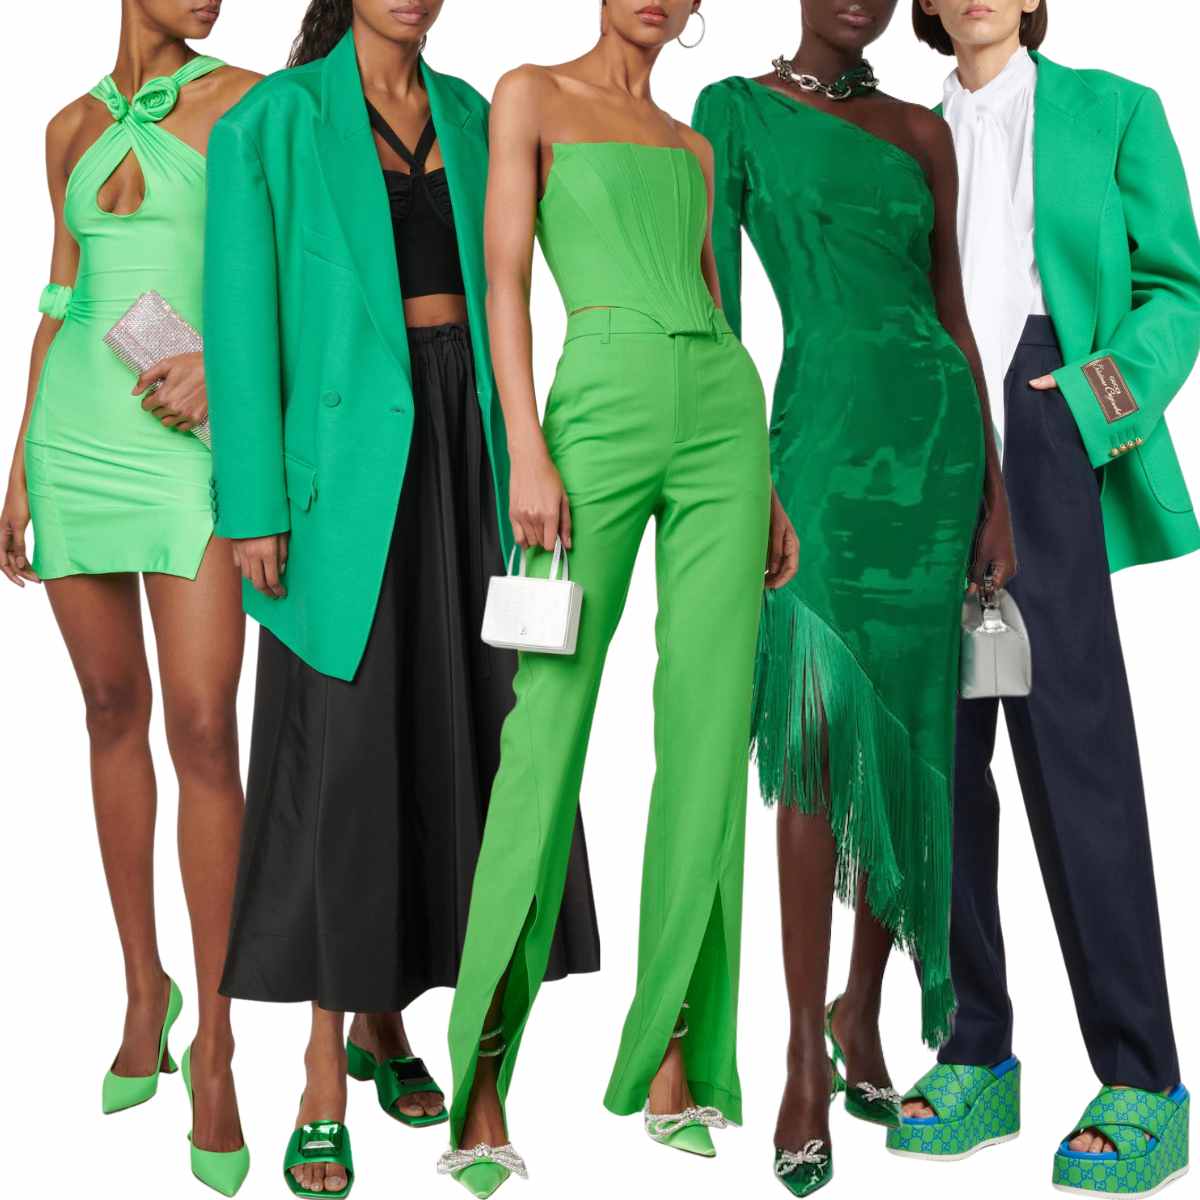 Collage of 5 women wearing different all green shoes outfits with contrast green clothing.